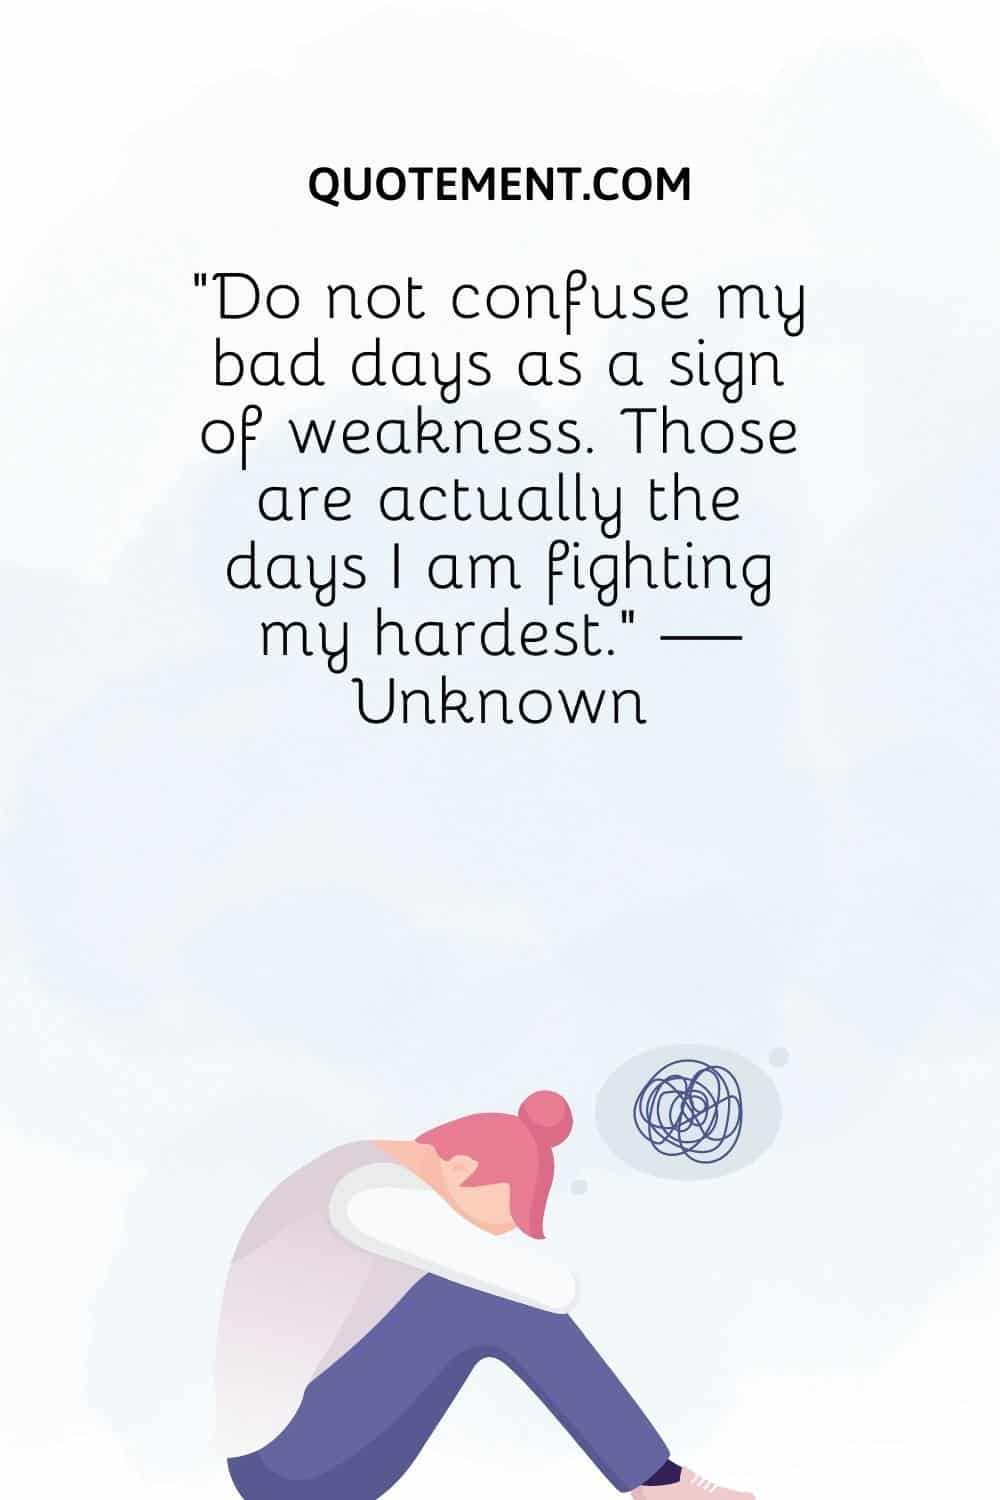 Do not confuse my bad days as a sign of weakness